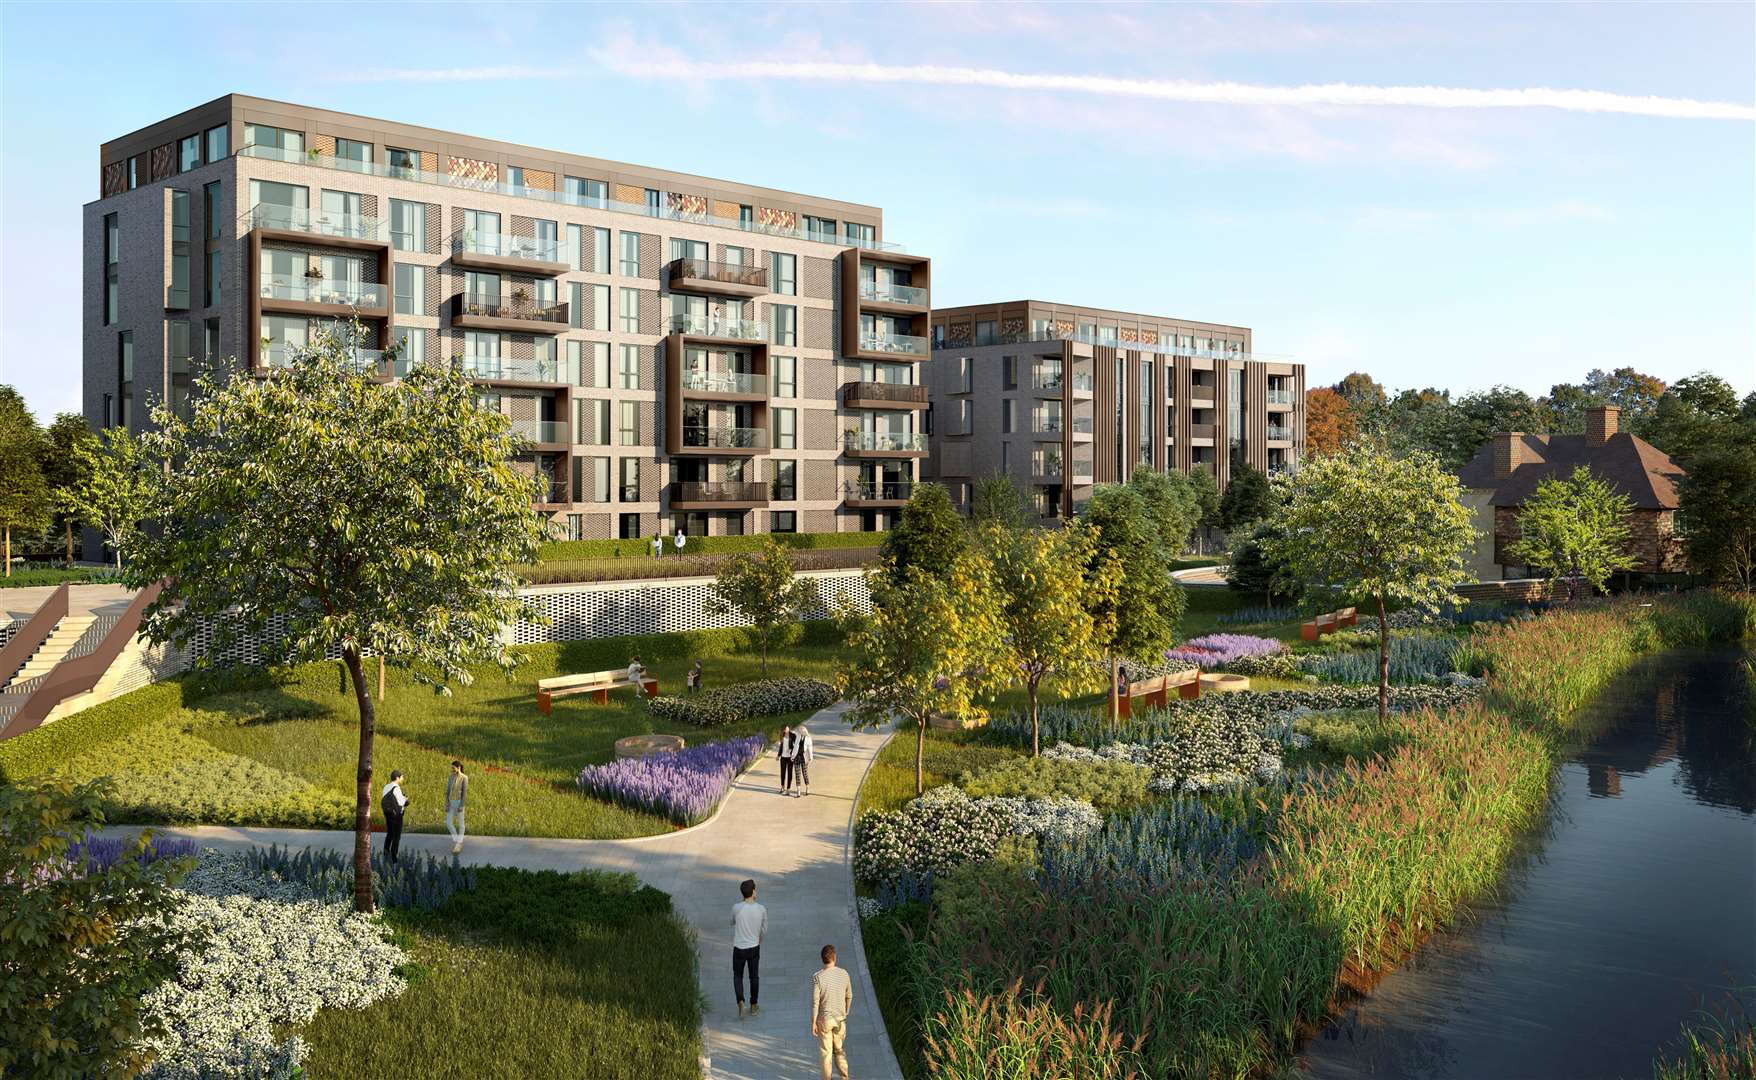 More than 250 homes were earmarked for the site by London developer U+I. Picture: U+I